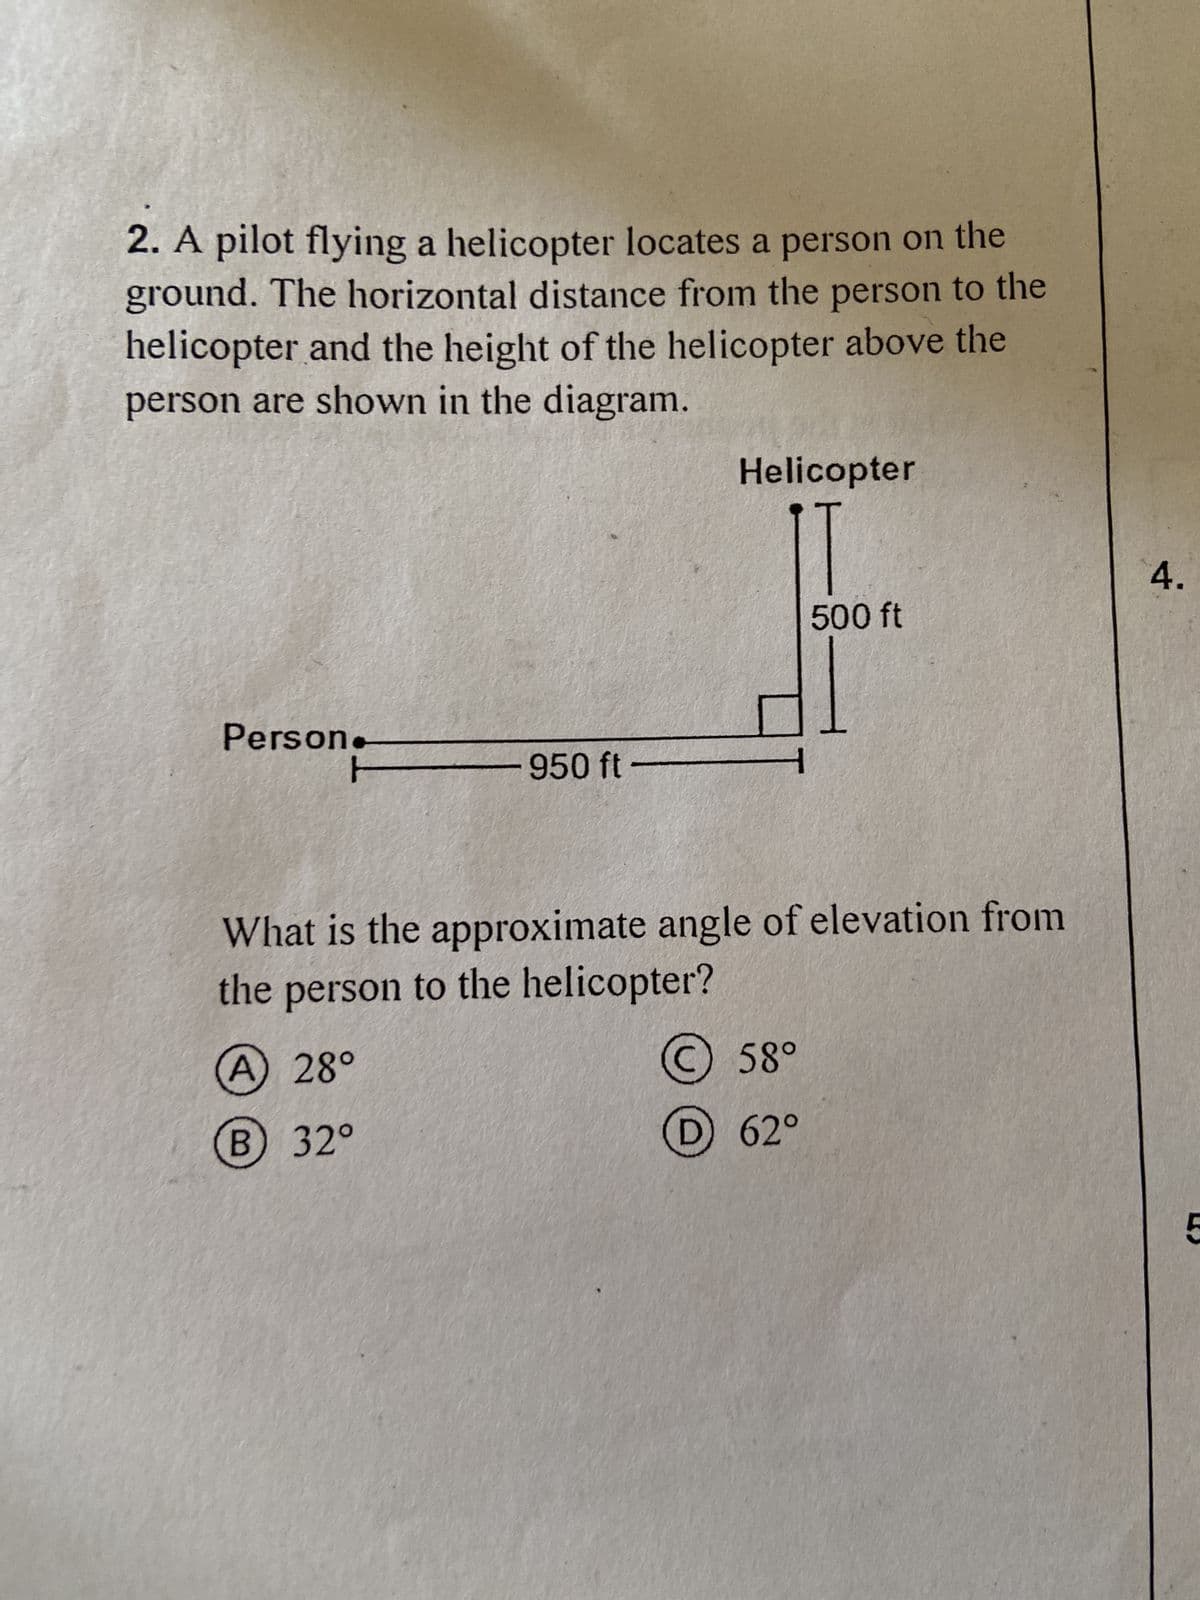 ### Problem Statement

A pilot flying a helicopter locates a person on the ground. The horizontal distance from the person to the helicopter and the height of the helicopter above the person are shown in the diagram.

---
**Diagram:**

- A line segment labeled "Person" on the left extending horizontally 950 ft to the right.
- A vertical line segment labeled "Helicopter" on the right, extending upward 500 ft.
- The right-angle triangle formed by these segments represents the relationship between the person on the ground and the helicopter above them.

---

**Question:**

What is the approximate angle of elevation from the person to the helicopter?

**Choices:**

A. 28°
B. 32°
C. 58°
D. 62°

---

### Explanation:

This problem involves basic trigonometry. The angle of elevation can be found using the tangent function, which is the ratio of the opposite side (height of the helicopter) to the adjacent side (horizontal distance from the person to the helicopter).

\[ \tan(\theta) = \frac{\text{opposite}}{\text{adjacent}} = \frac{500 \text{ ft}}{950 \text{ ft}} \]

Solving for \( \theta \) will give us the angle of elevation.